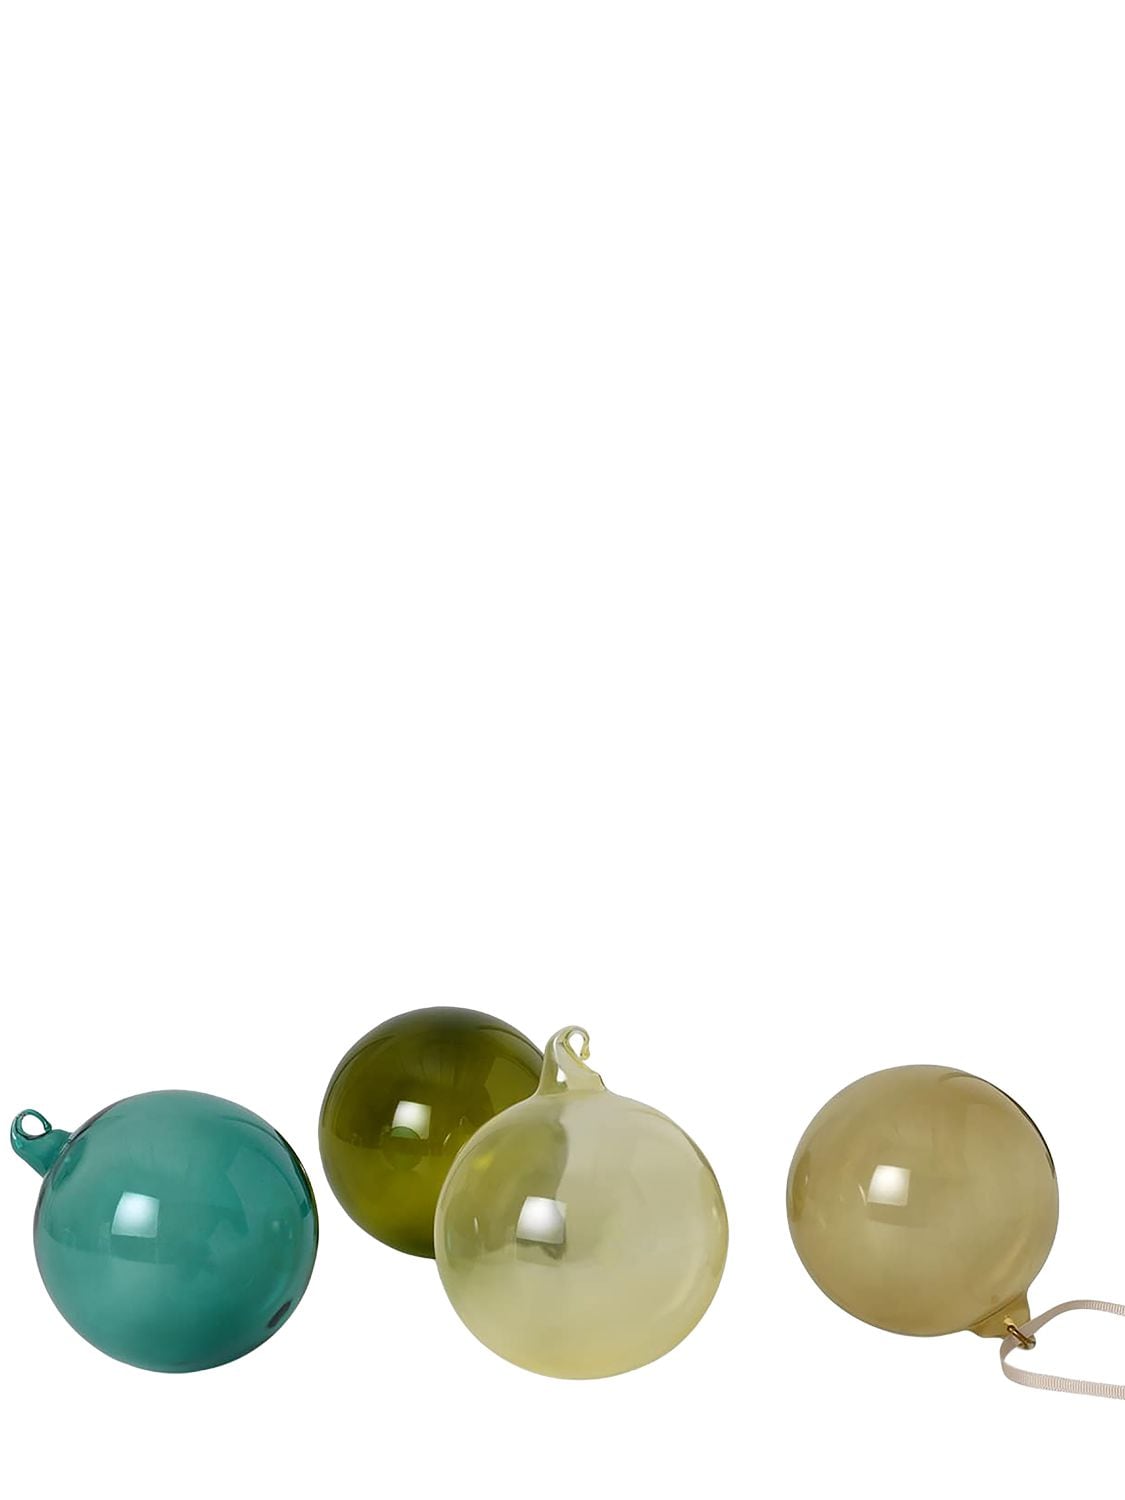 Image of Set Of 4 Mixed Dark Large Glass Baubles